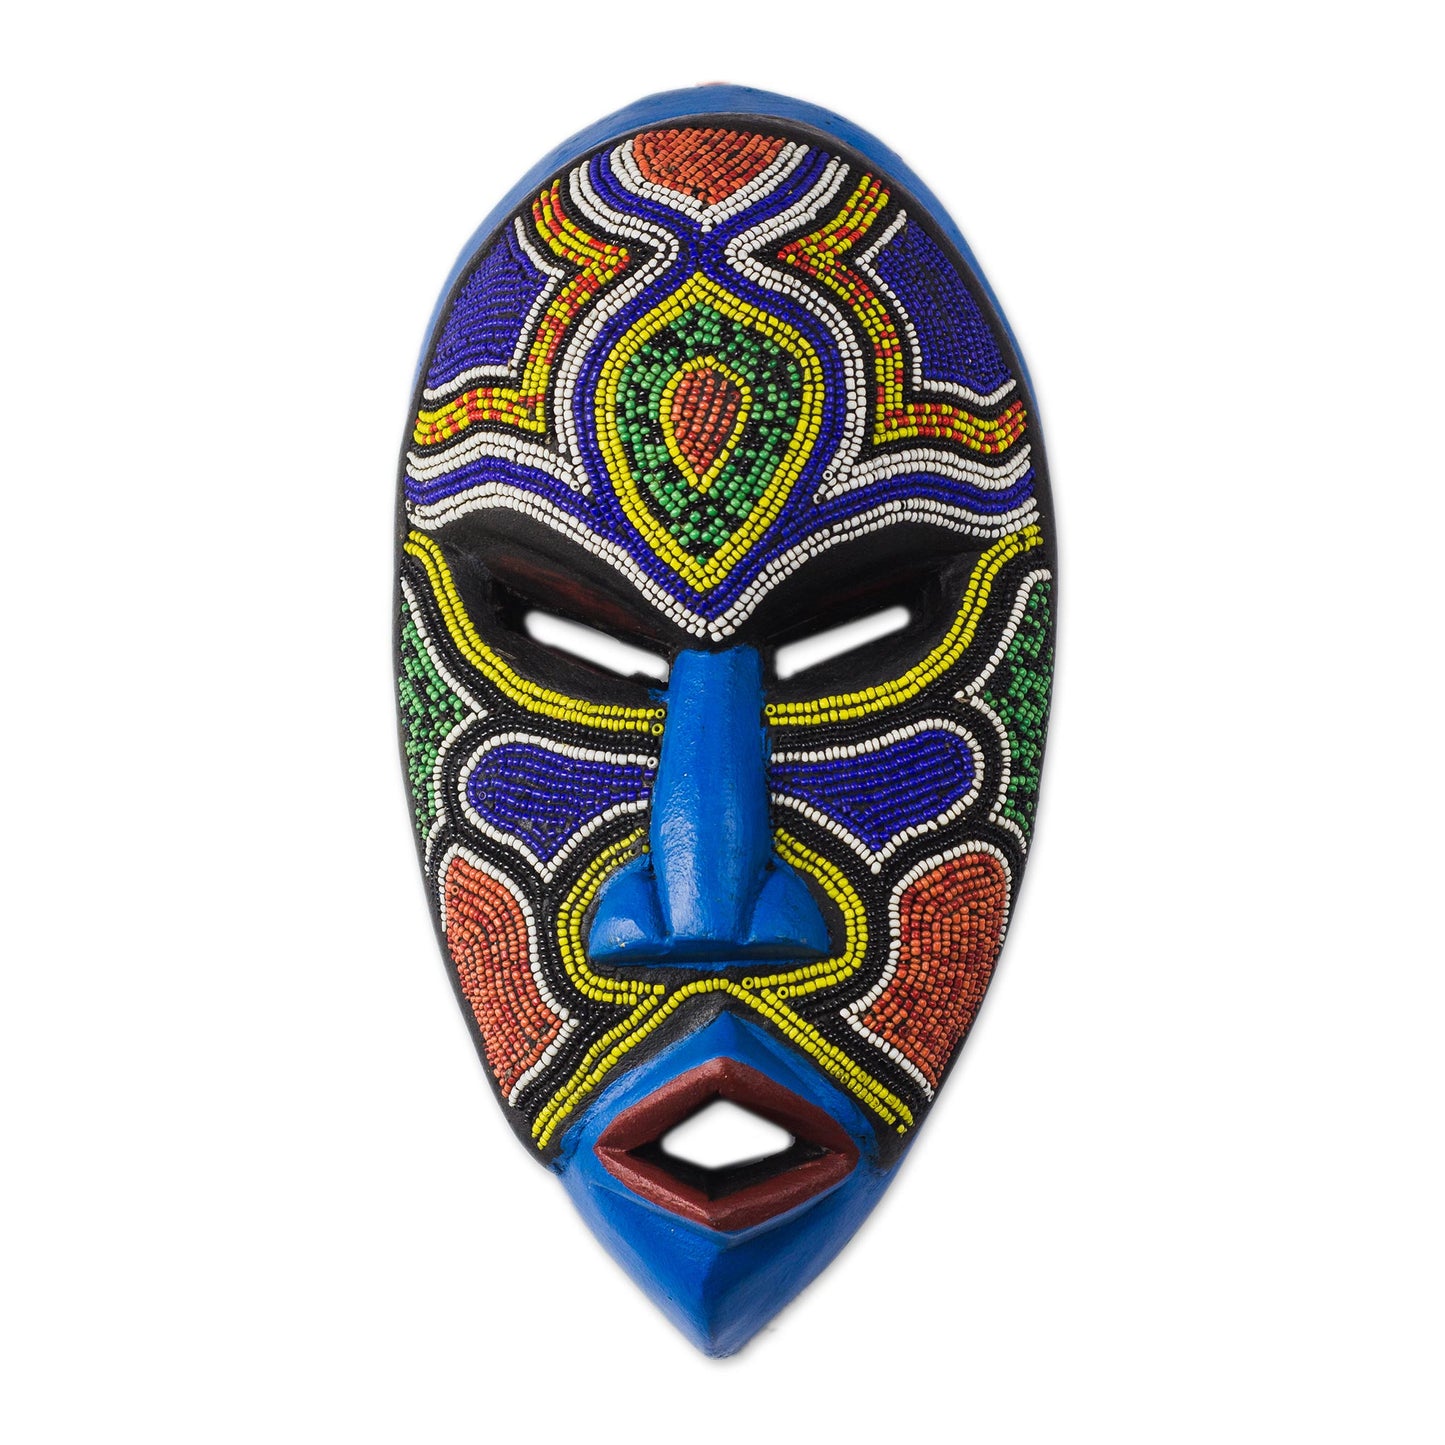 Beaded Love Recycled Plastic Beaded African Wood Mask from Ghana